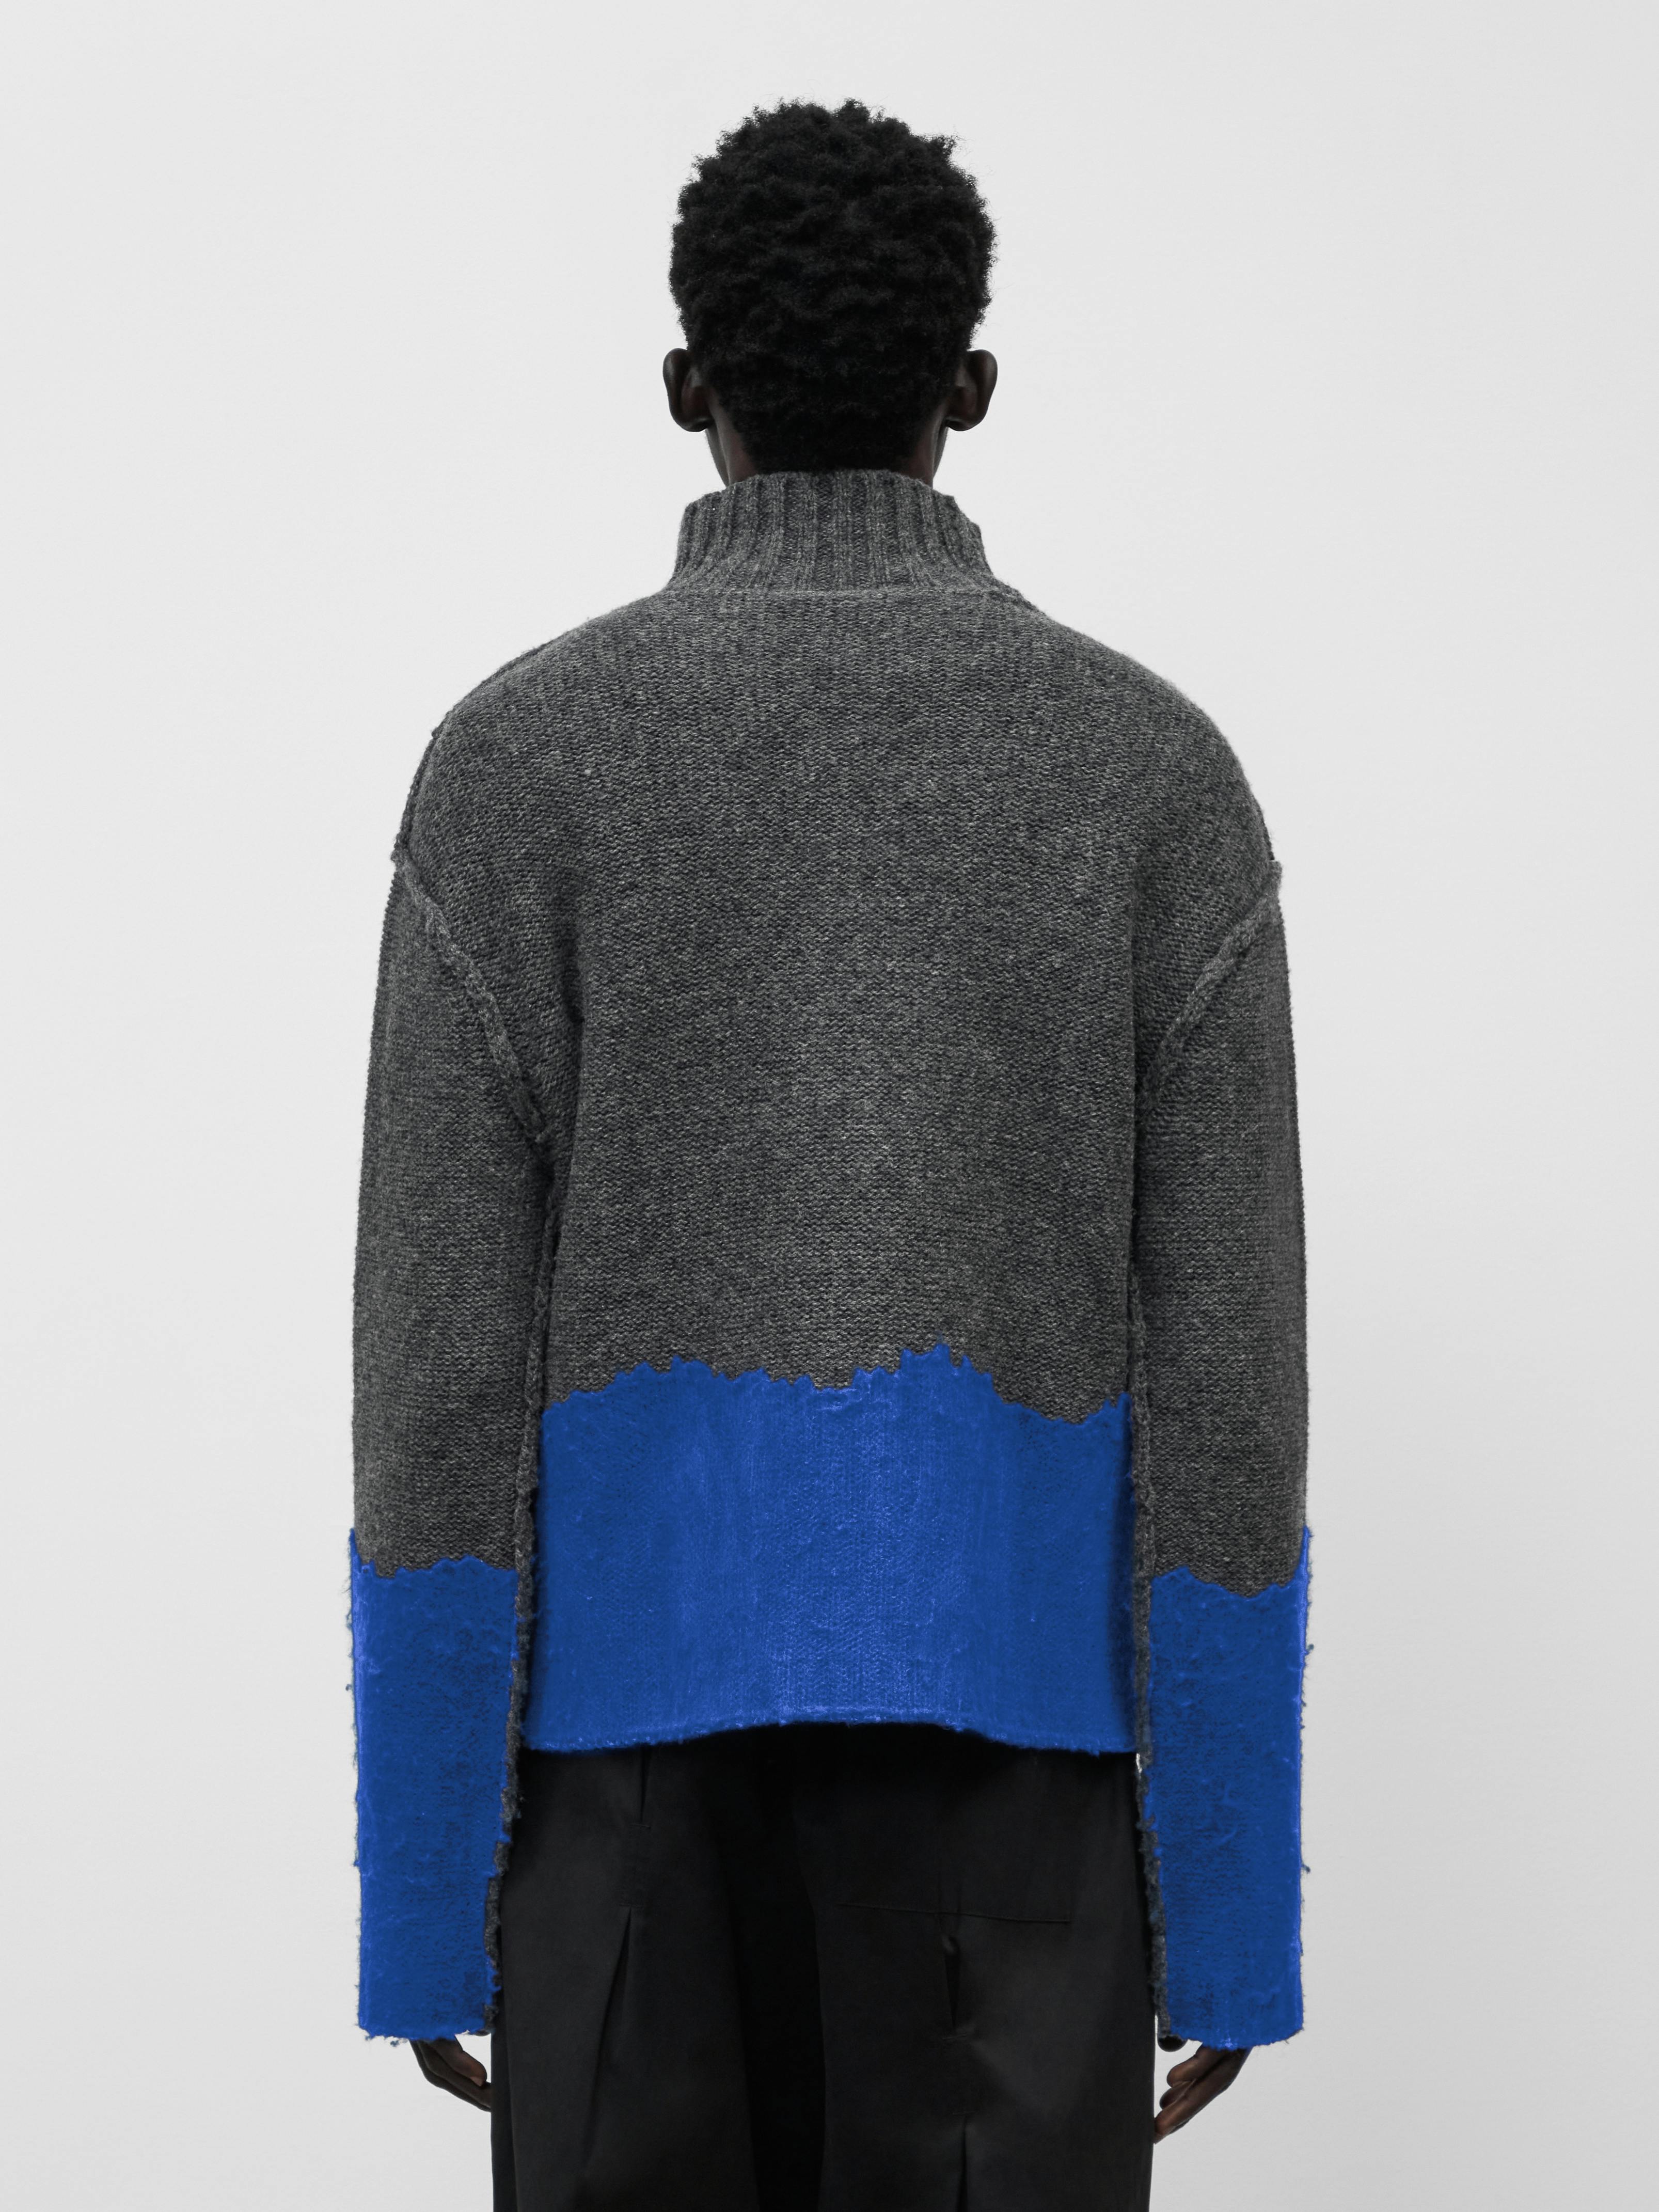 Saturate Knit High Neck